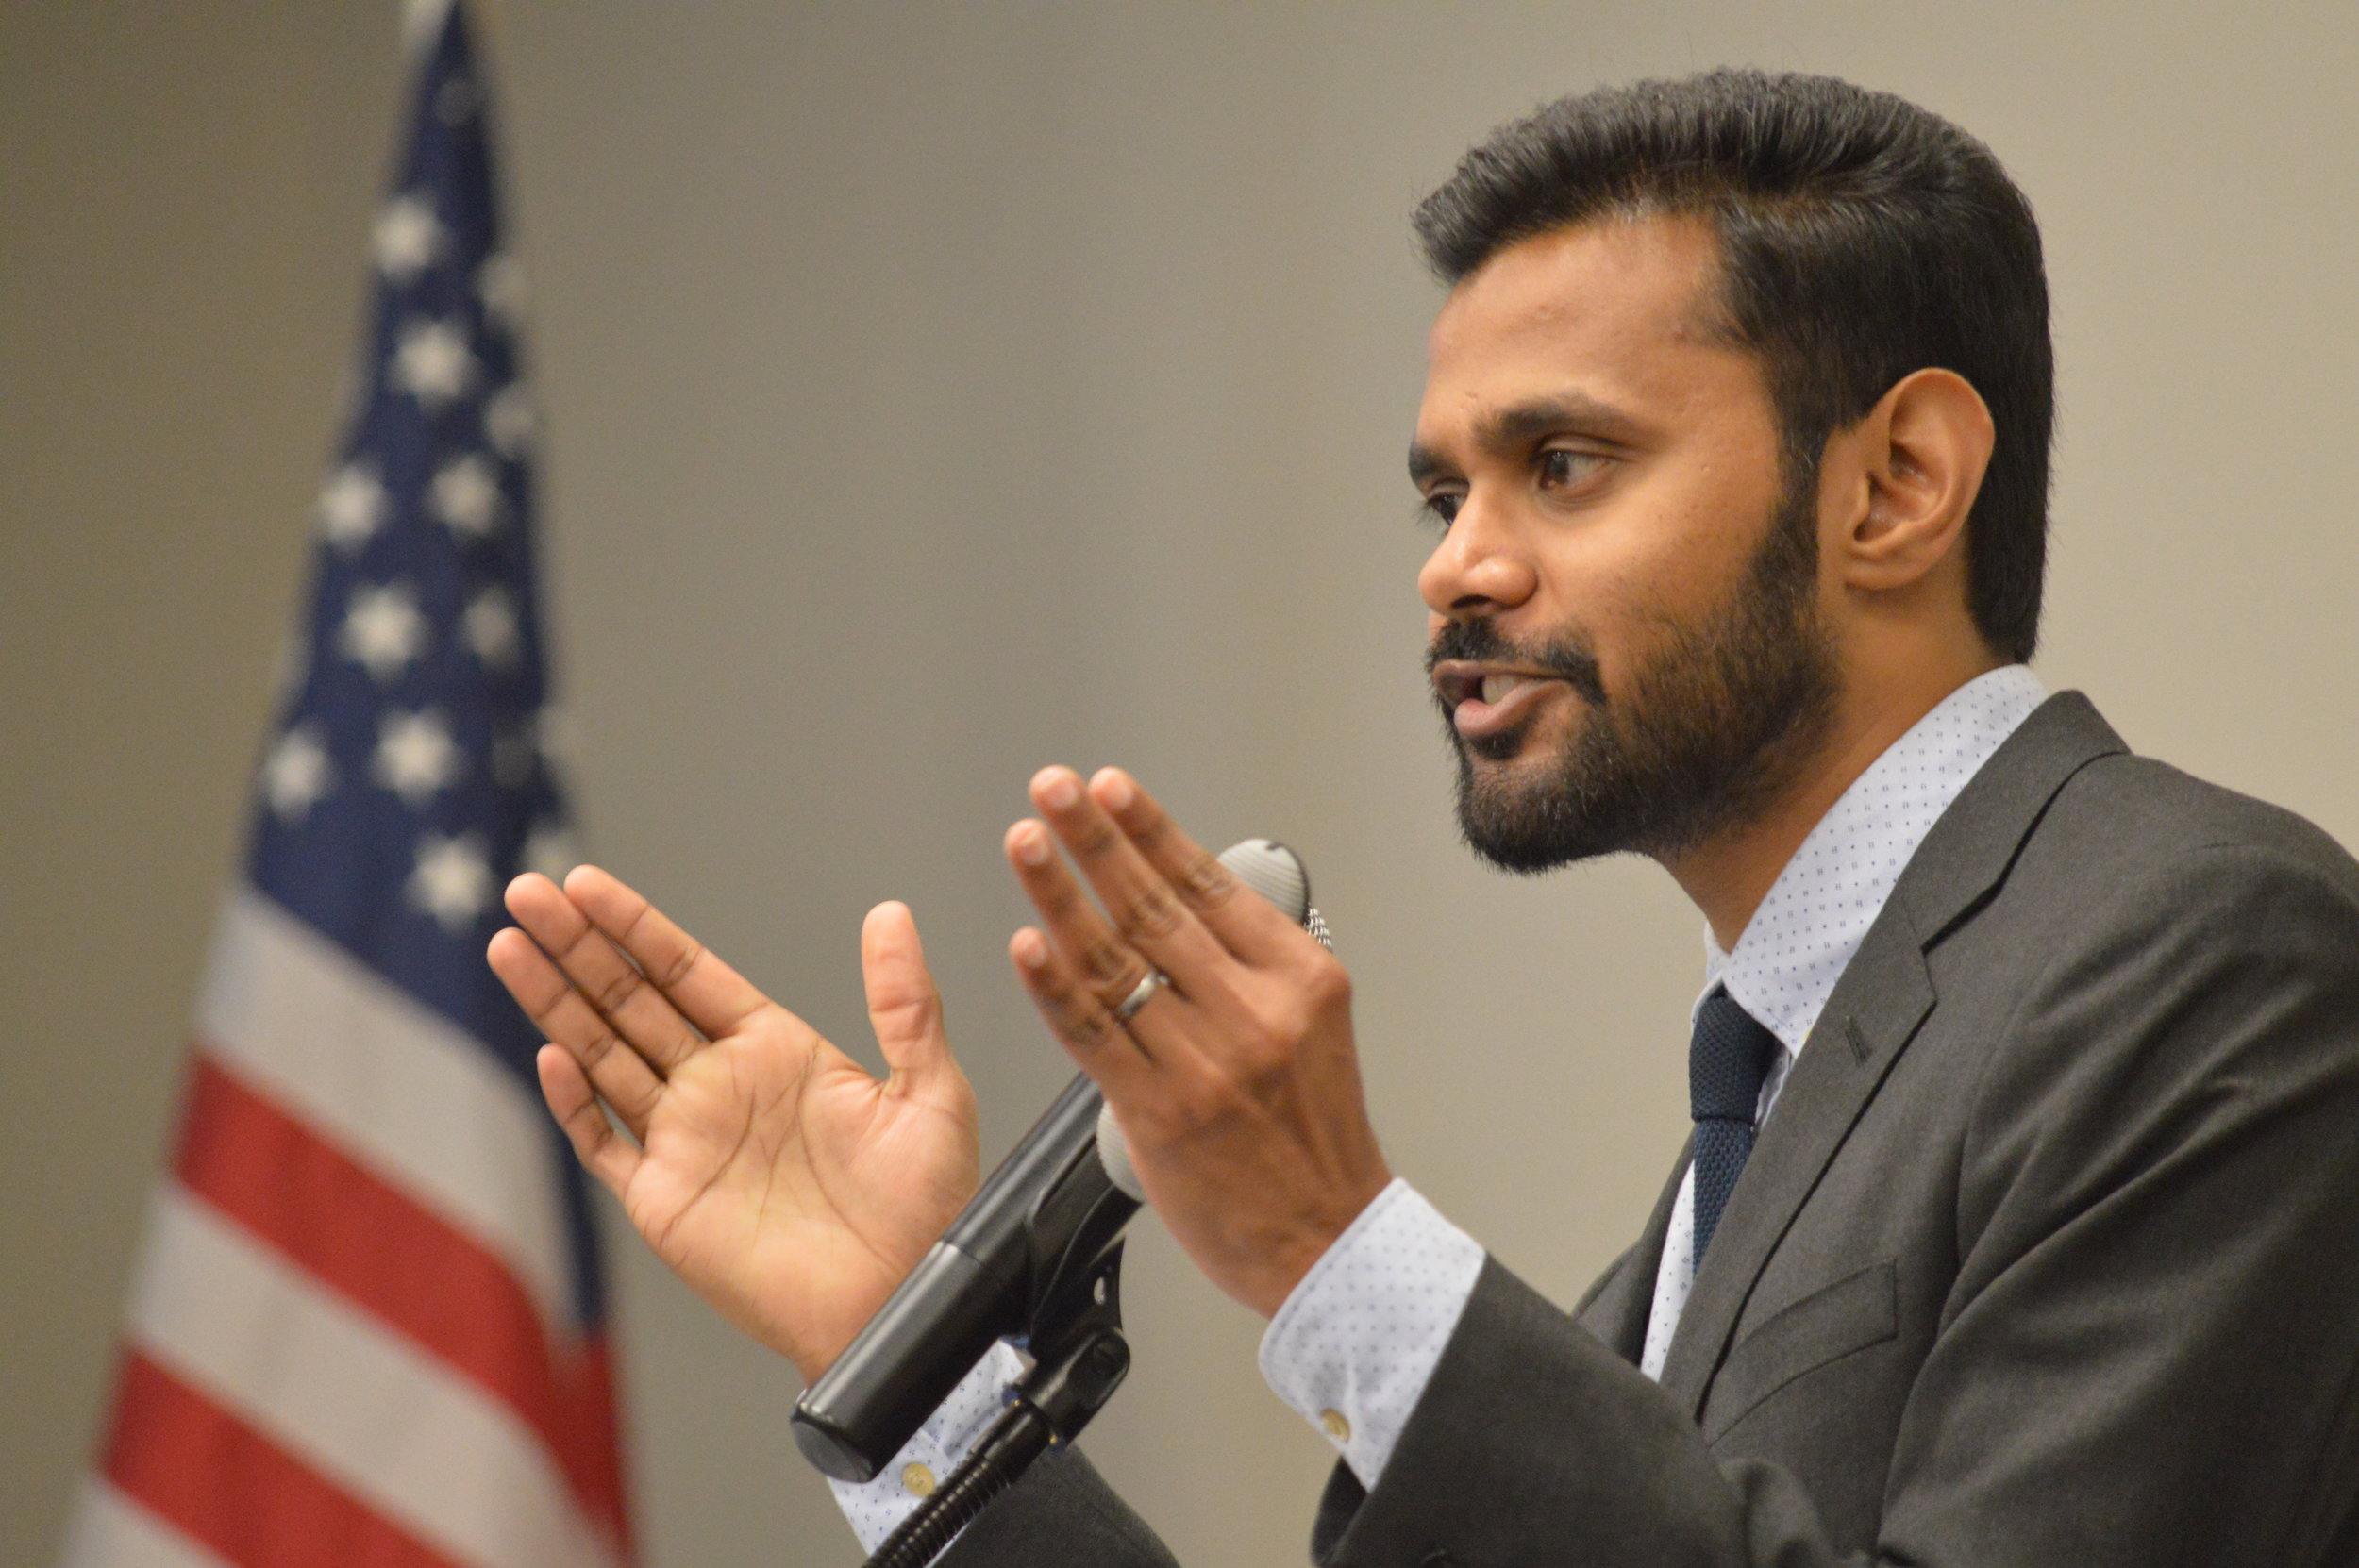 Mervin Jebaraj, interim director of the University of Arkansas Center for Business and Economic Research, describes the outstanding peer regions that Northwest Arkansas is using as benchmarks in the annual State of the Northwest Arkansas Region Report.